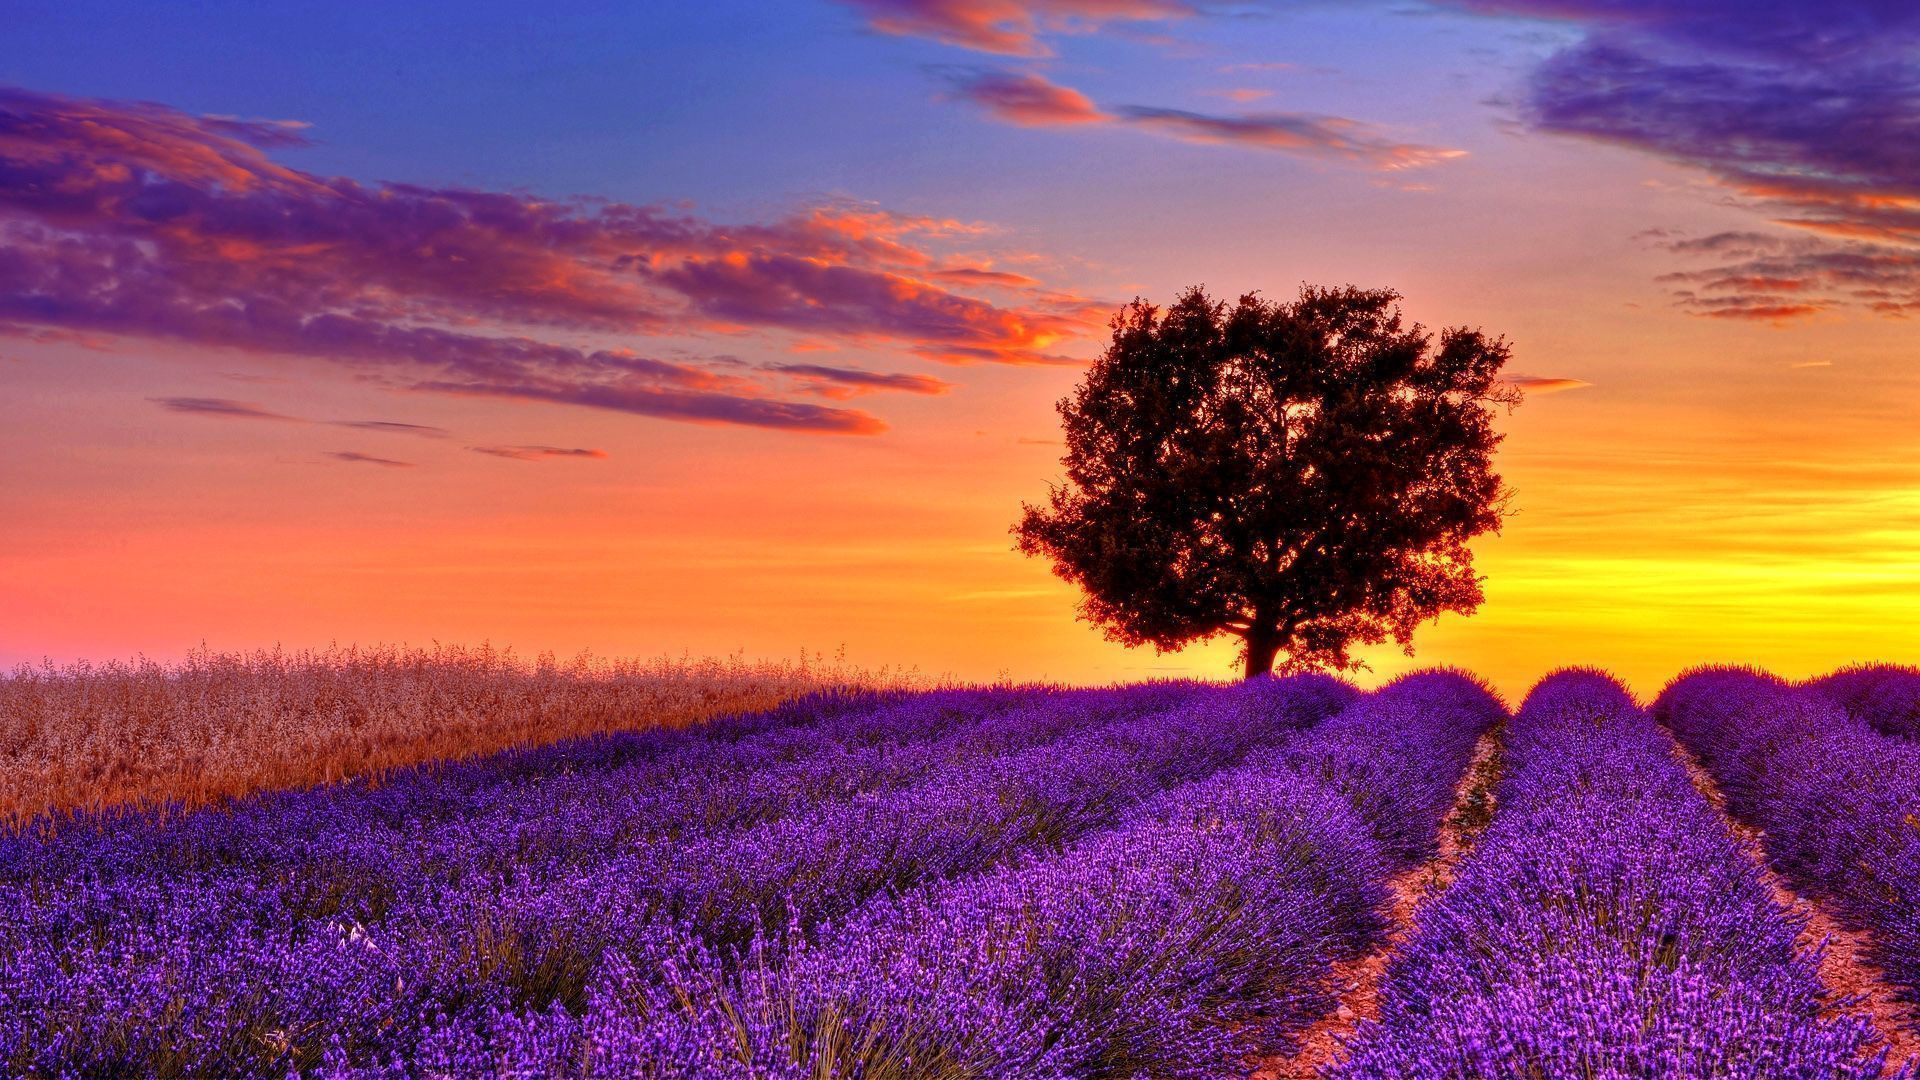 Sunset Field HD Wallpapers | Sunset Field Images | Cool Wallpapers